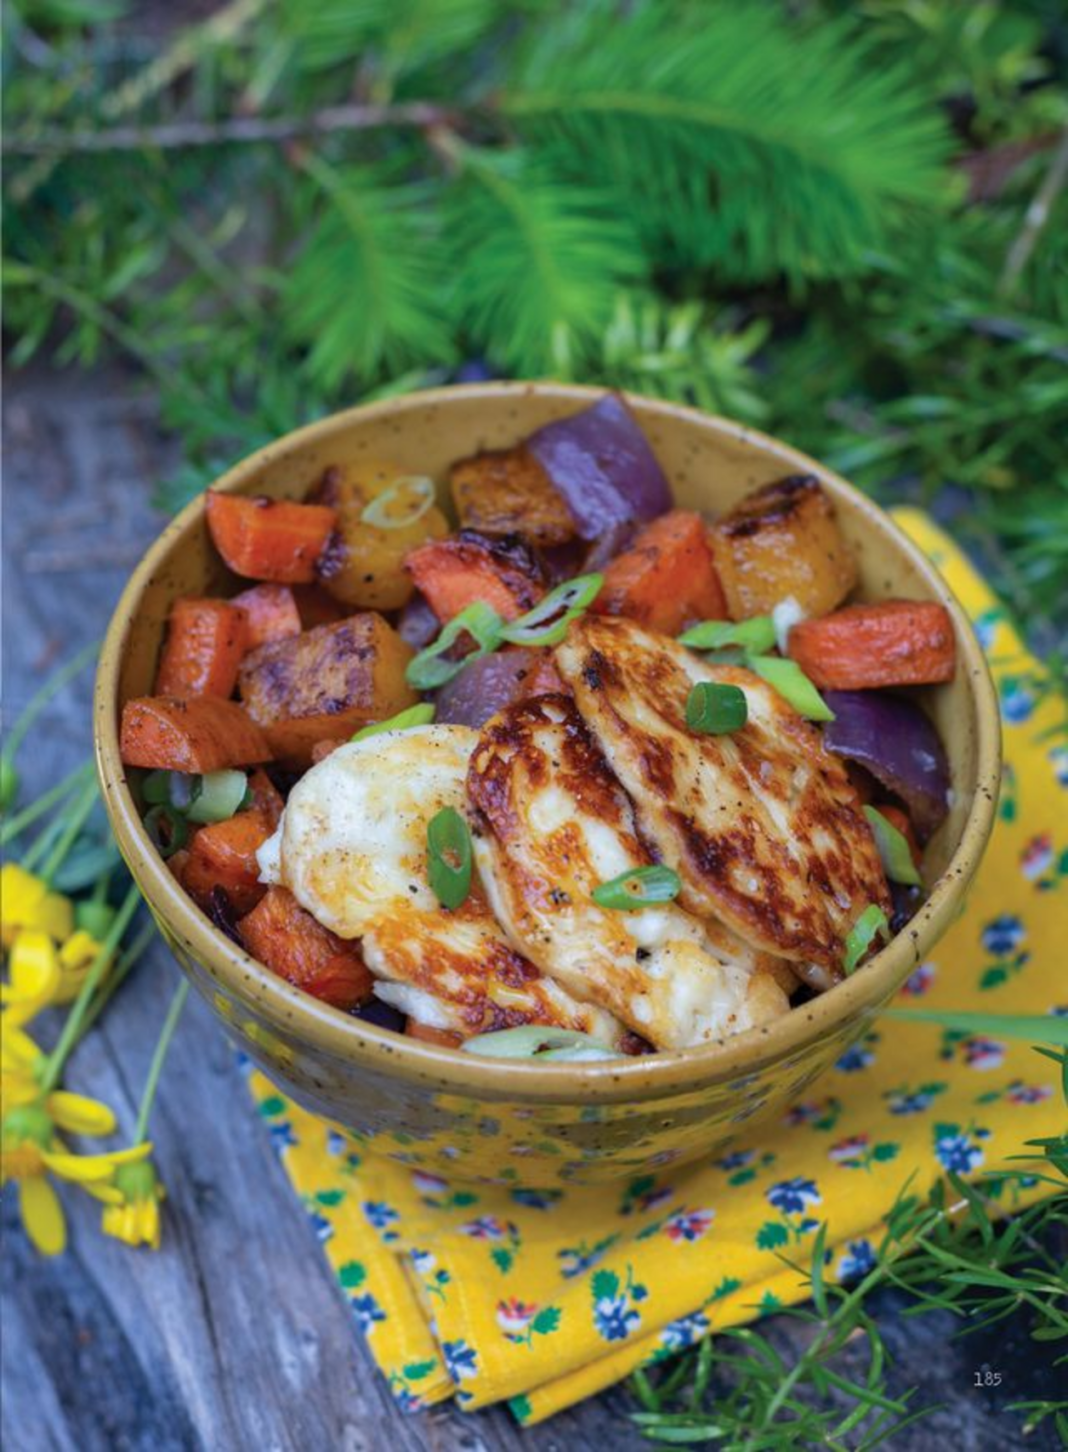 Halloumi bowls from The Forest Feast Road Trip cookbook.